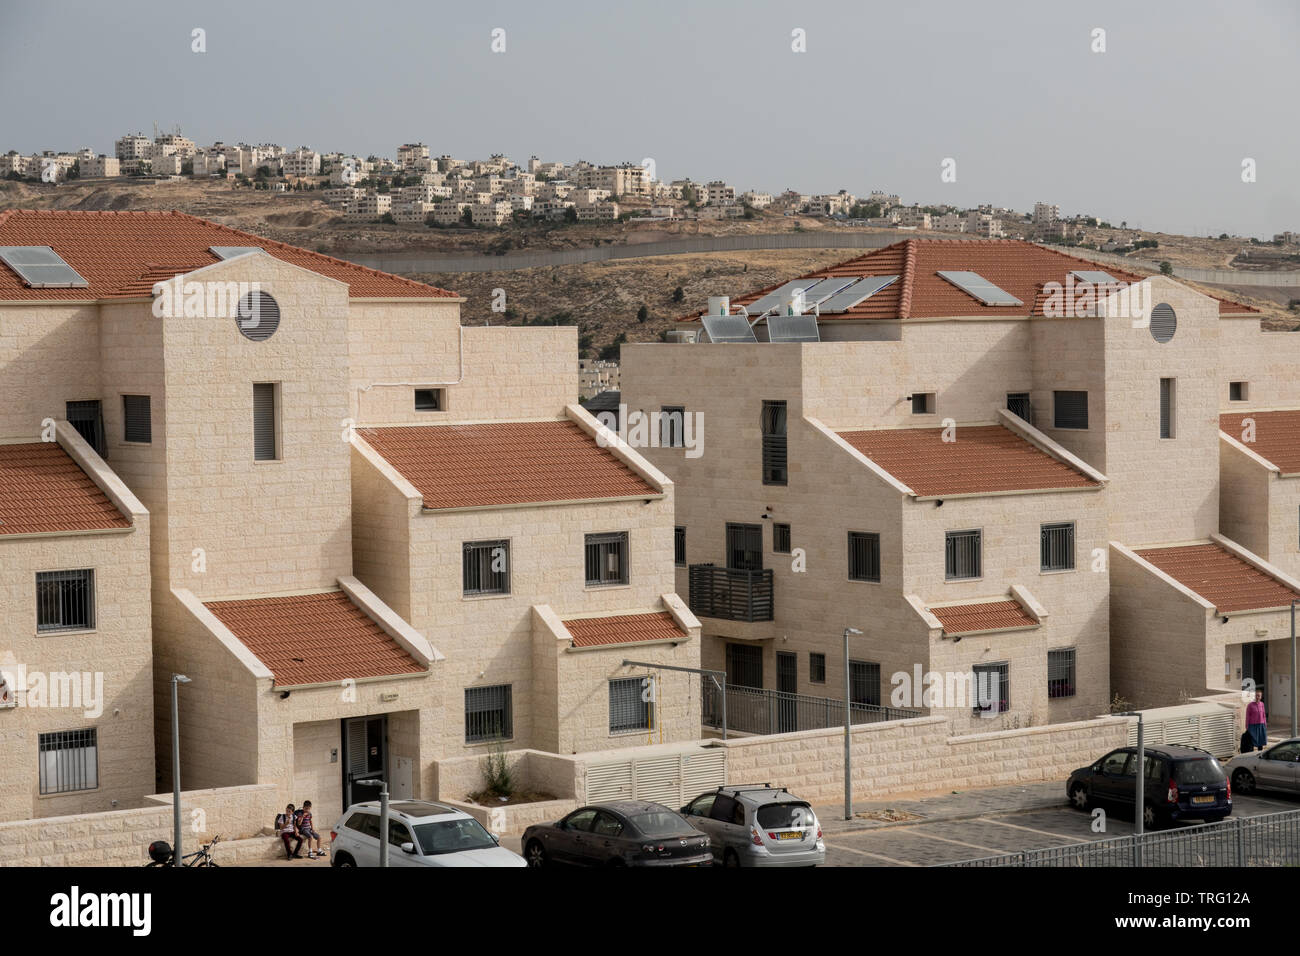 Jerusalem, Israel. 5th June, 2019. A northward view in Jerusalem's Pisgat Zeev neighborhood depicts recently constructed red roofed homes in the foreground with Israel's security barrier in mid ground and the outskirts of Palestinian Qalandiya and Jaba beyond. Israel's Housing Ministry recently published tenders for the construction of 805 new housing units in the Ramot and Pisgat Zeev neighborhoods drawing EU condemnation (1st June, 2019) stating “The European Union is strongly opposed to Israel's settlement policy, including in East Jerusalem, which is illegal under international law and an Stock Photo